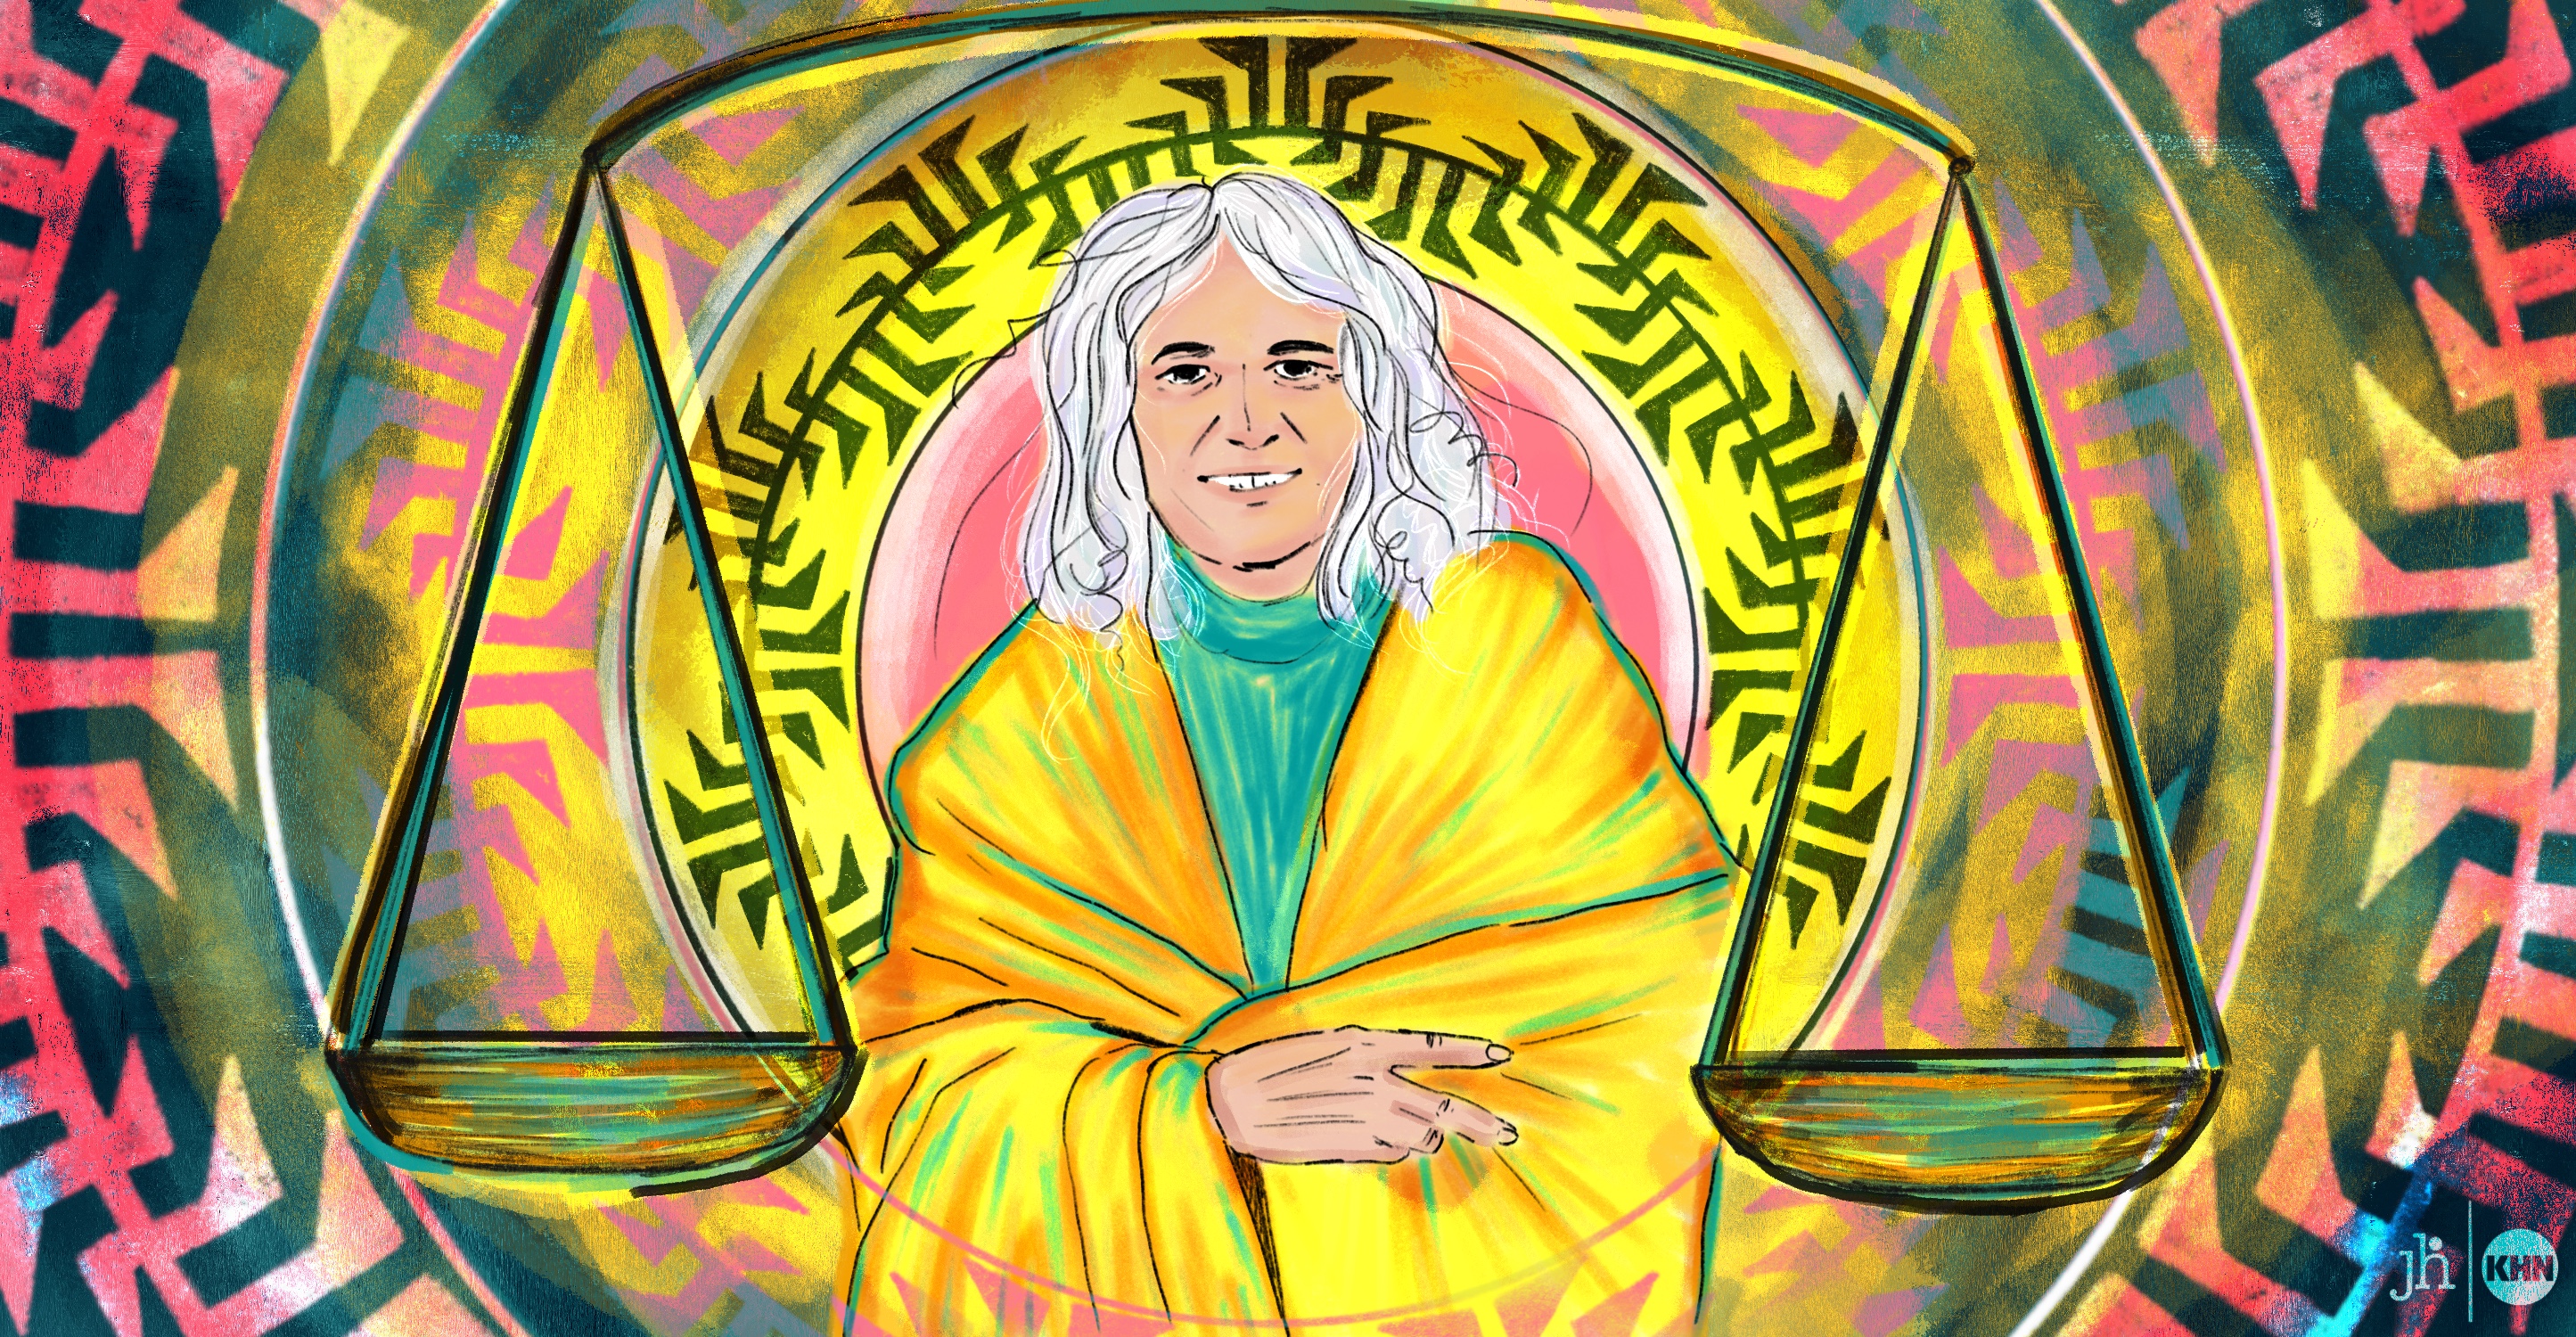 A digital illustration in watercolor and pencil. Judge Abby Abinanti is in the center of the image, painted in warm gold tones with highlights of teal and pink. Behind her, in a centered circle, is a pattern which represents the Yurok Tribe. A pair of Scales of Justice hang at each of her sides.